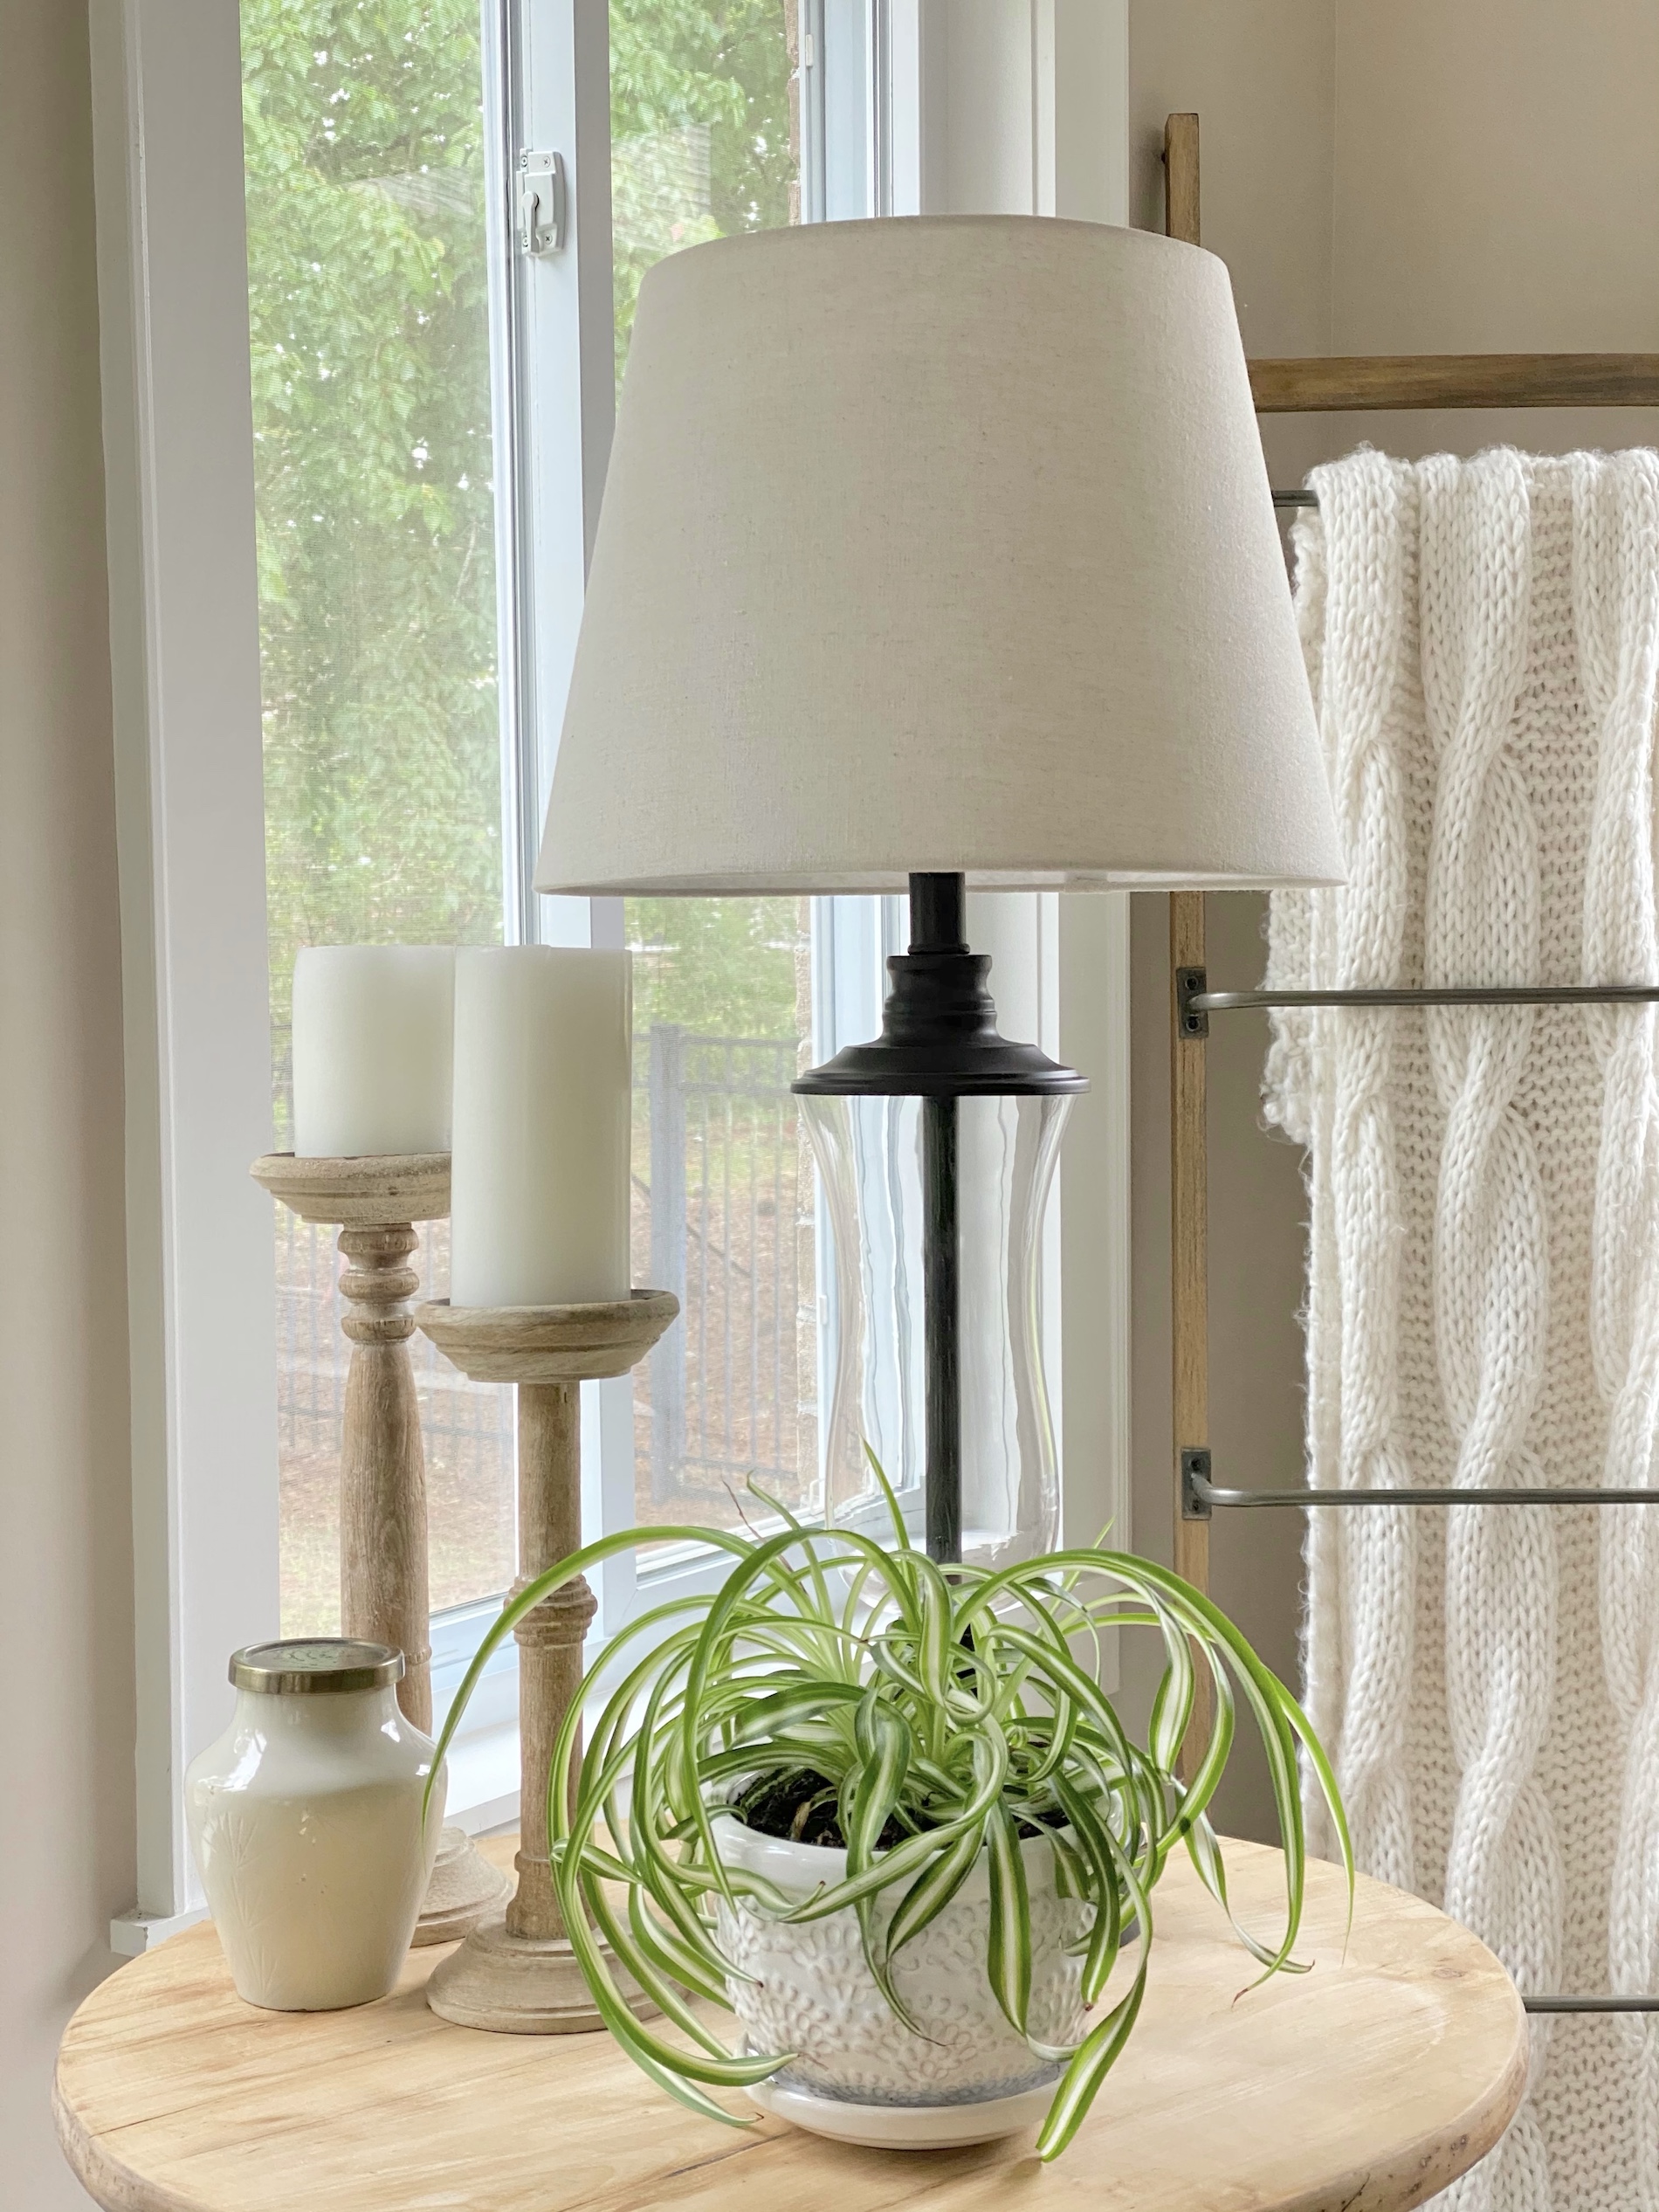 Spider plant on a side table in a white planter styled with a lamp and candlesticks.